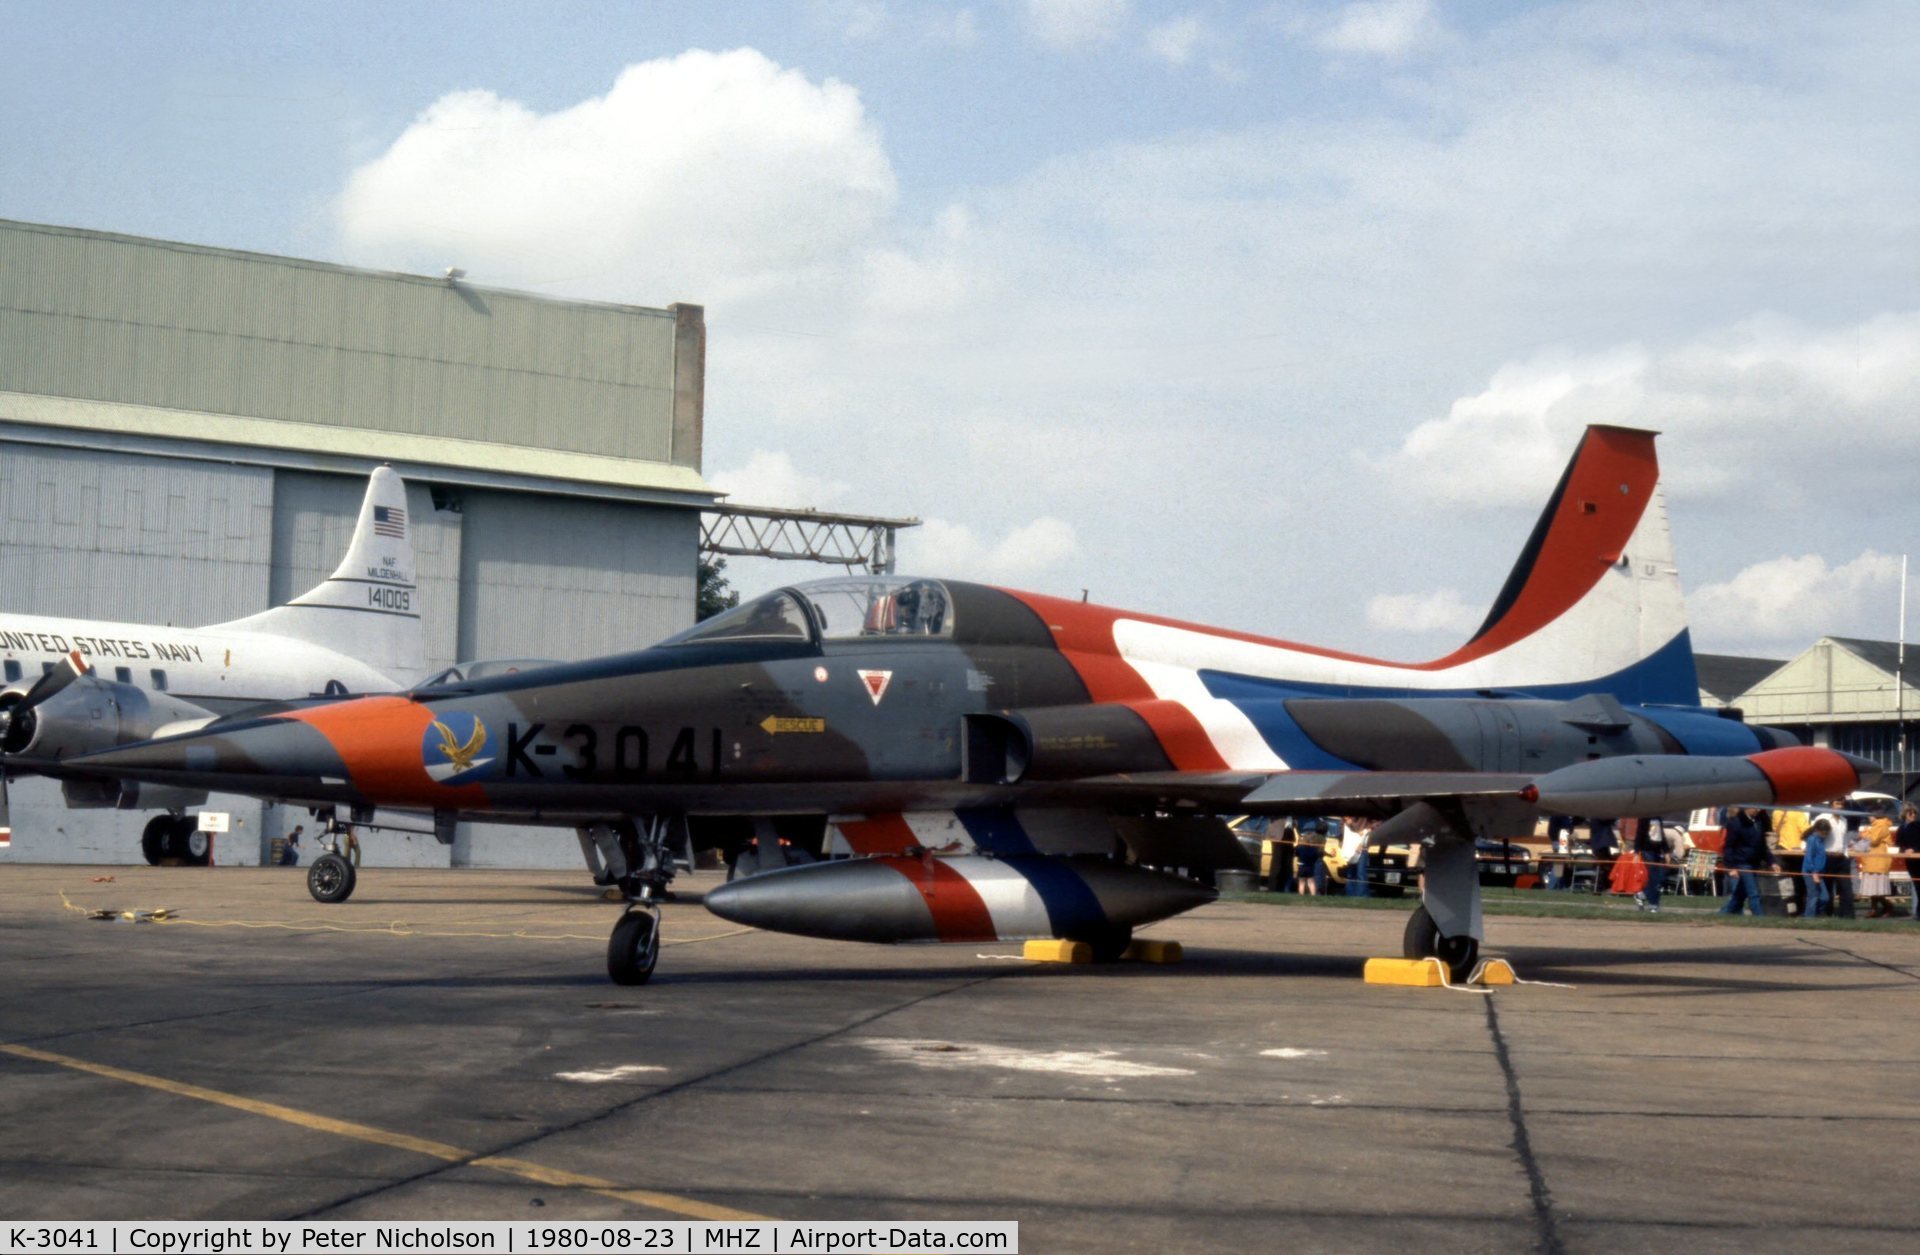 K-3041, 1970 Canadair NF-5A Freedom Fighter C/N 3041, Another view of the Royal Netherlands Air Force F-5A on display at the 1980 Mildenhall Air Fete.